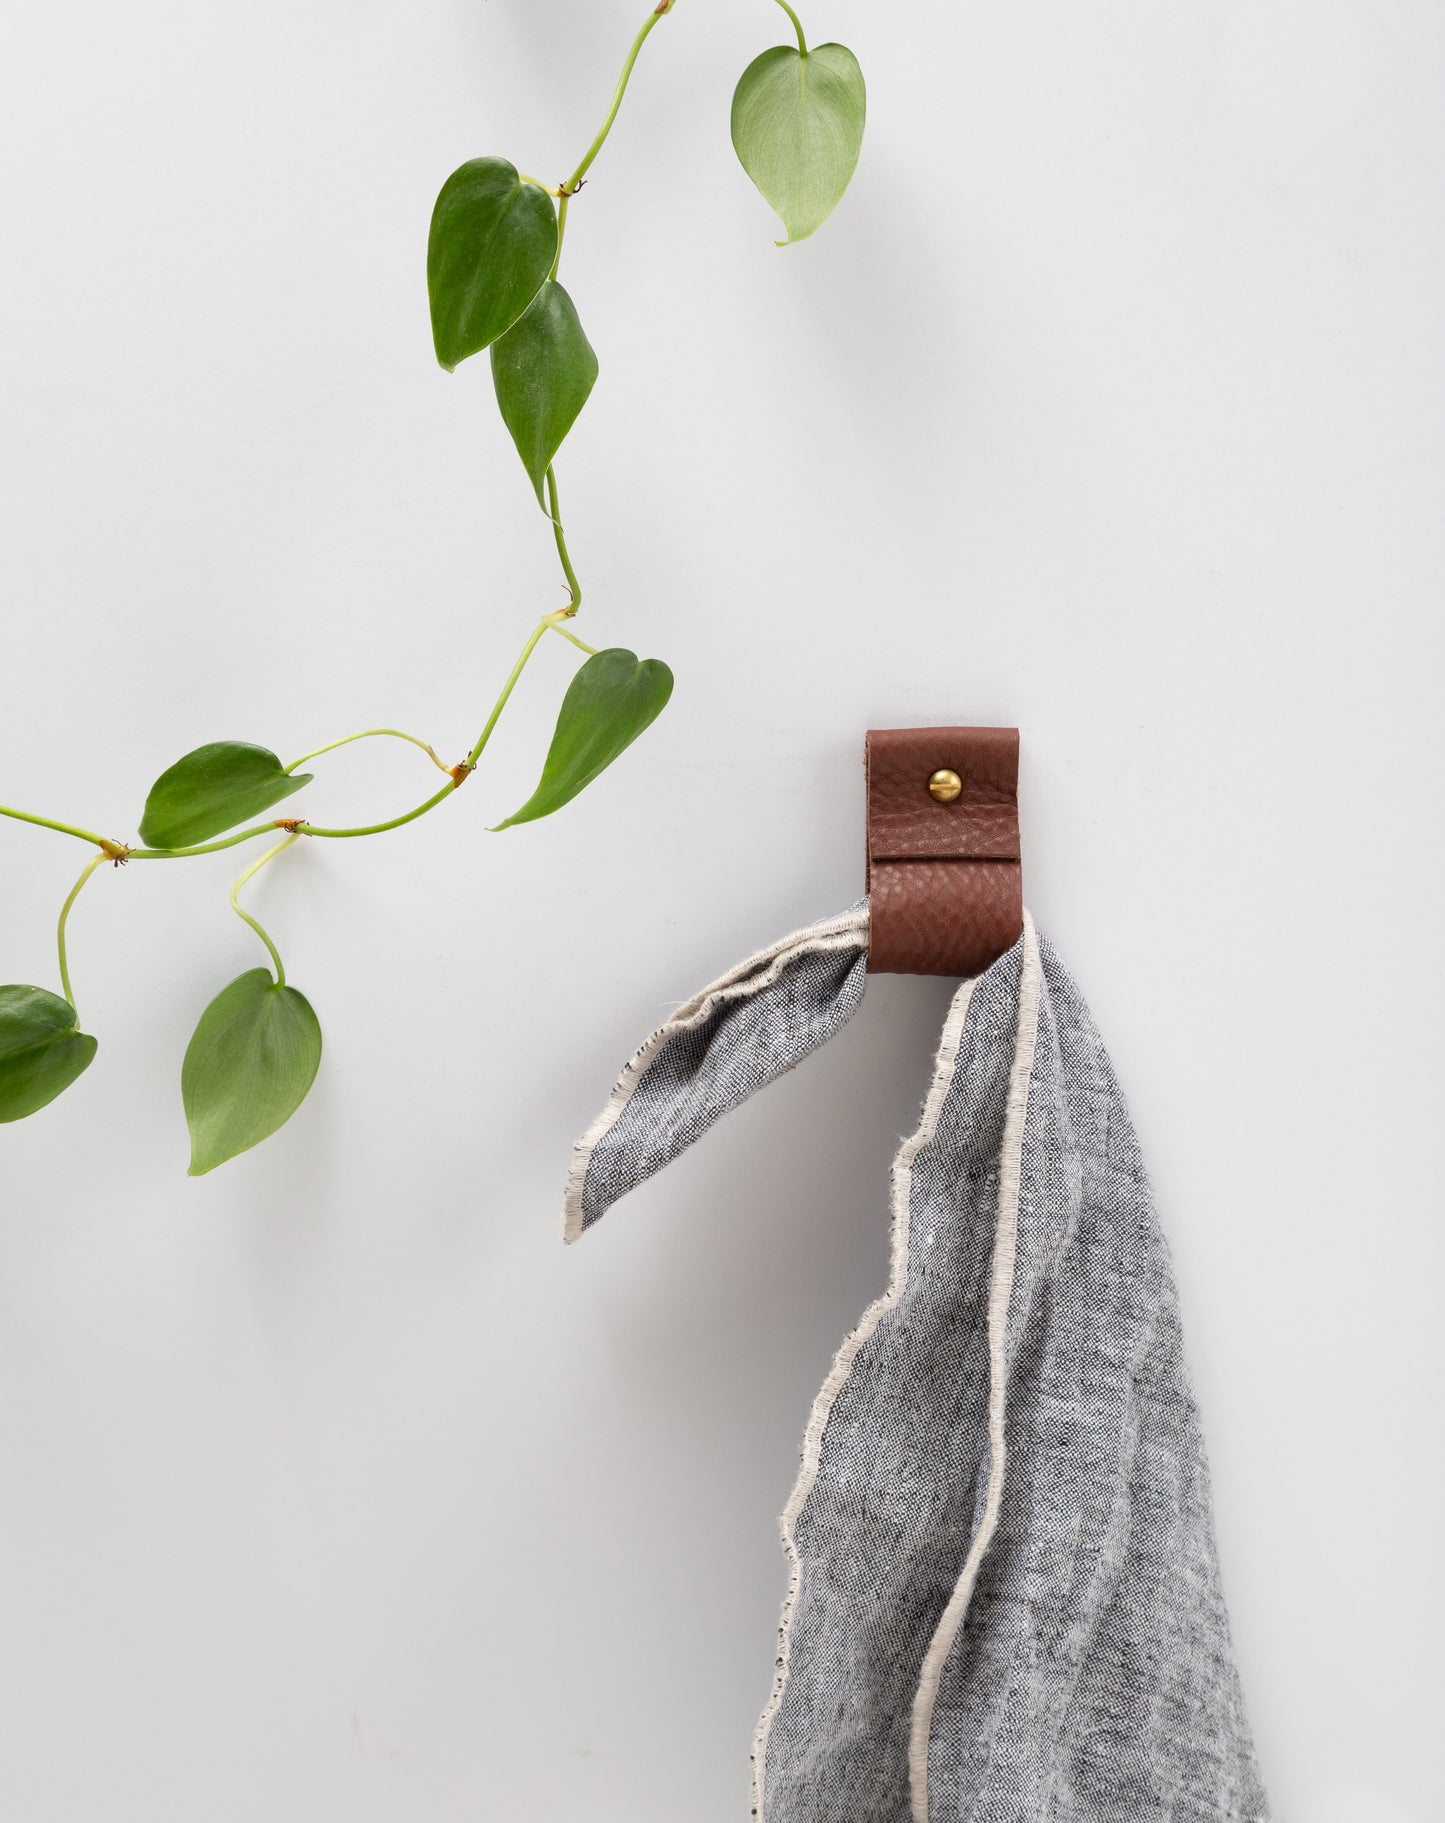 Small Leather Wall Strap [Wide]